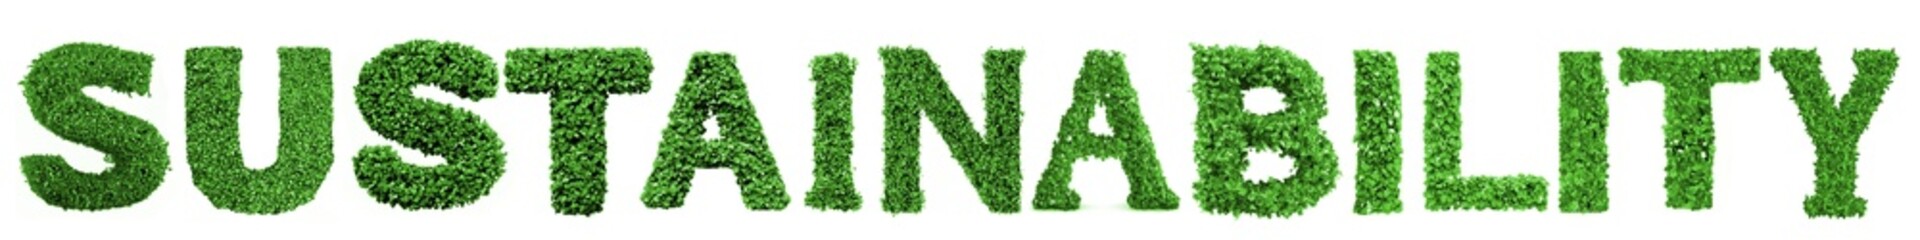 the word sustainability written in letters made of green leaves.